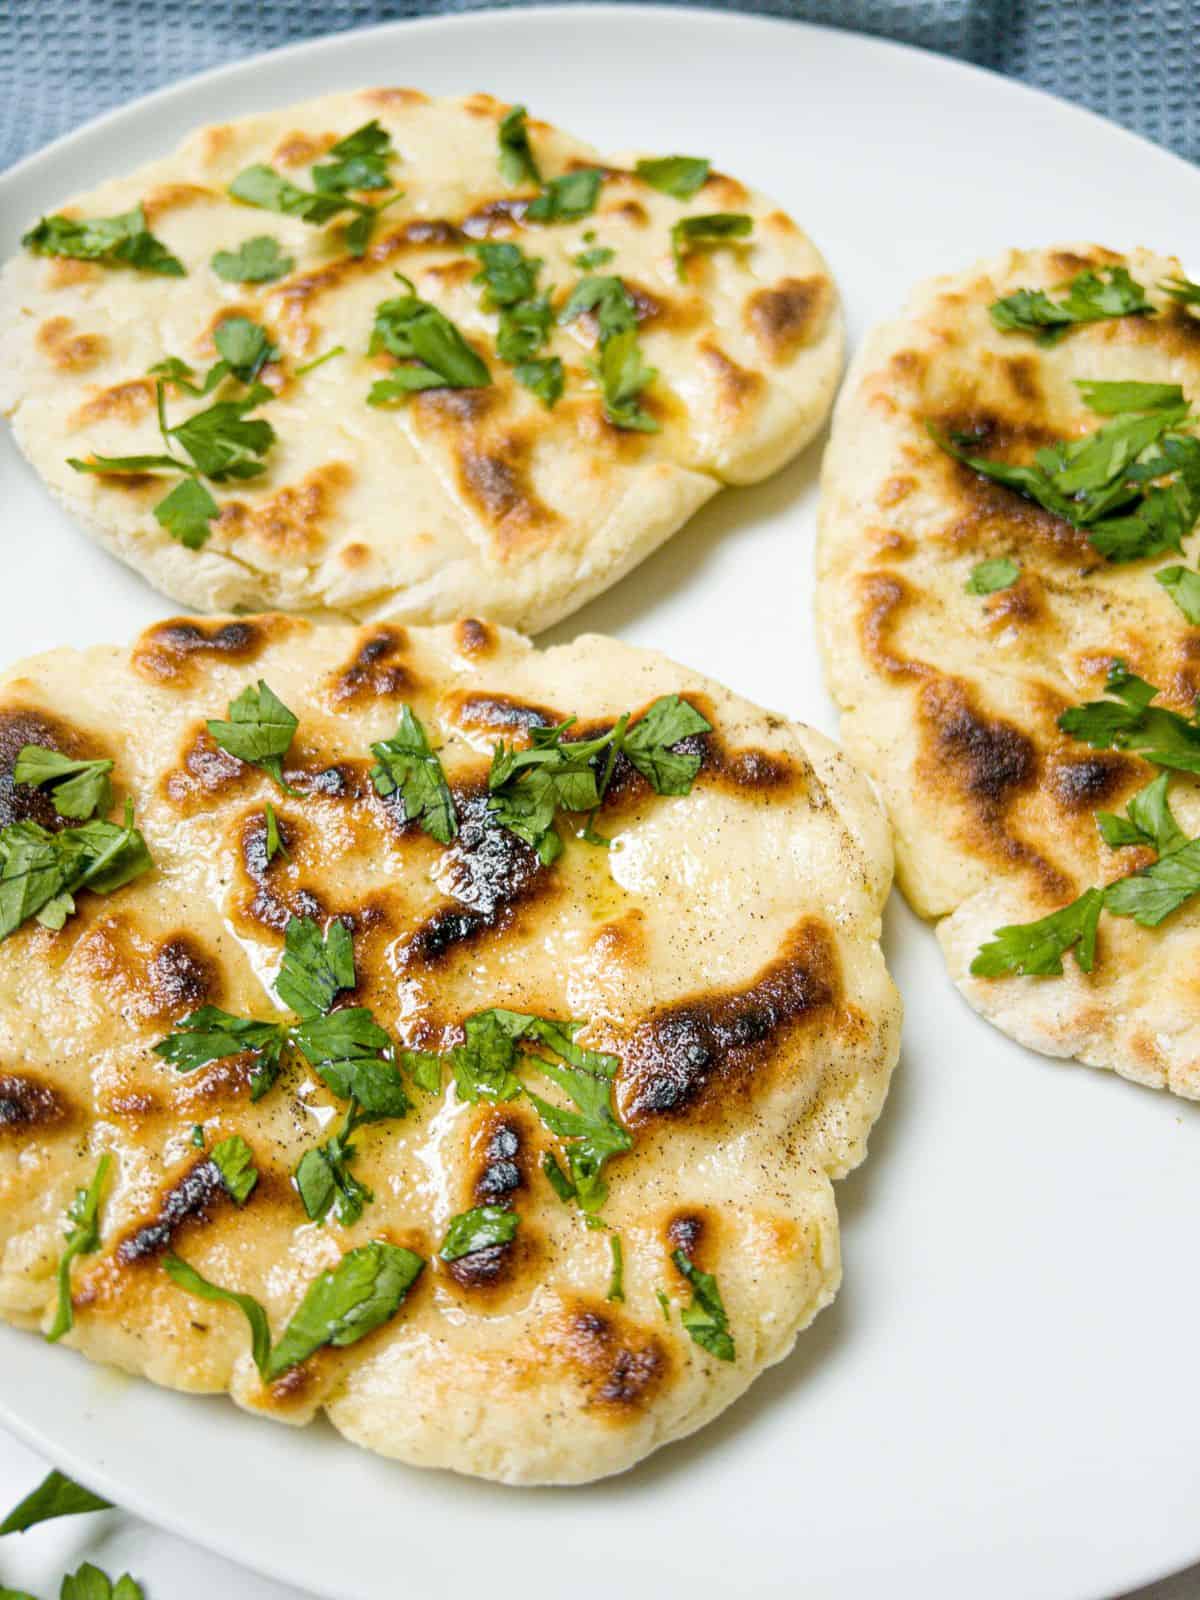 close up shot of three naan breads garnished with parsley on a white plate.